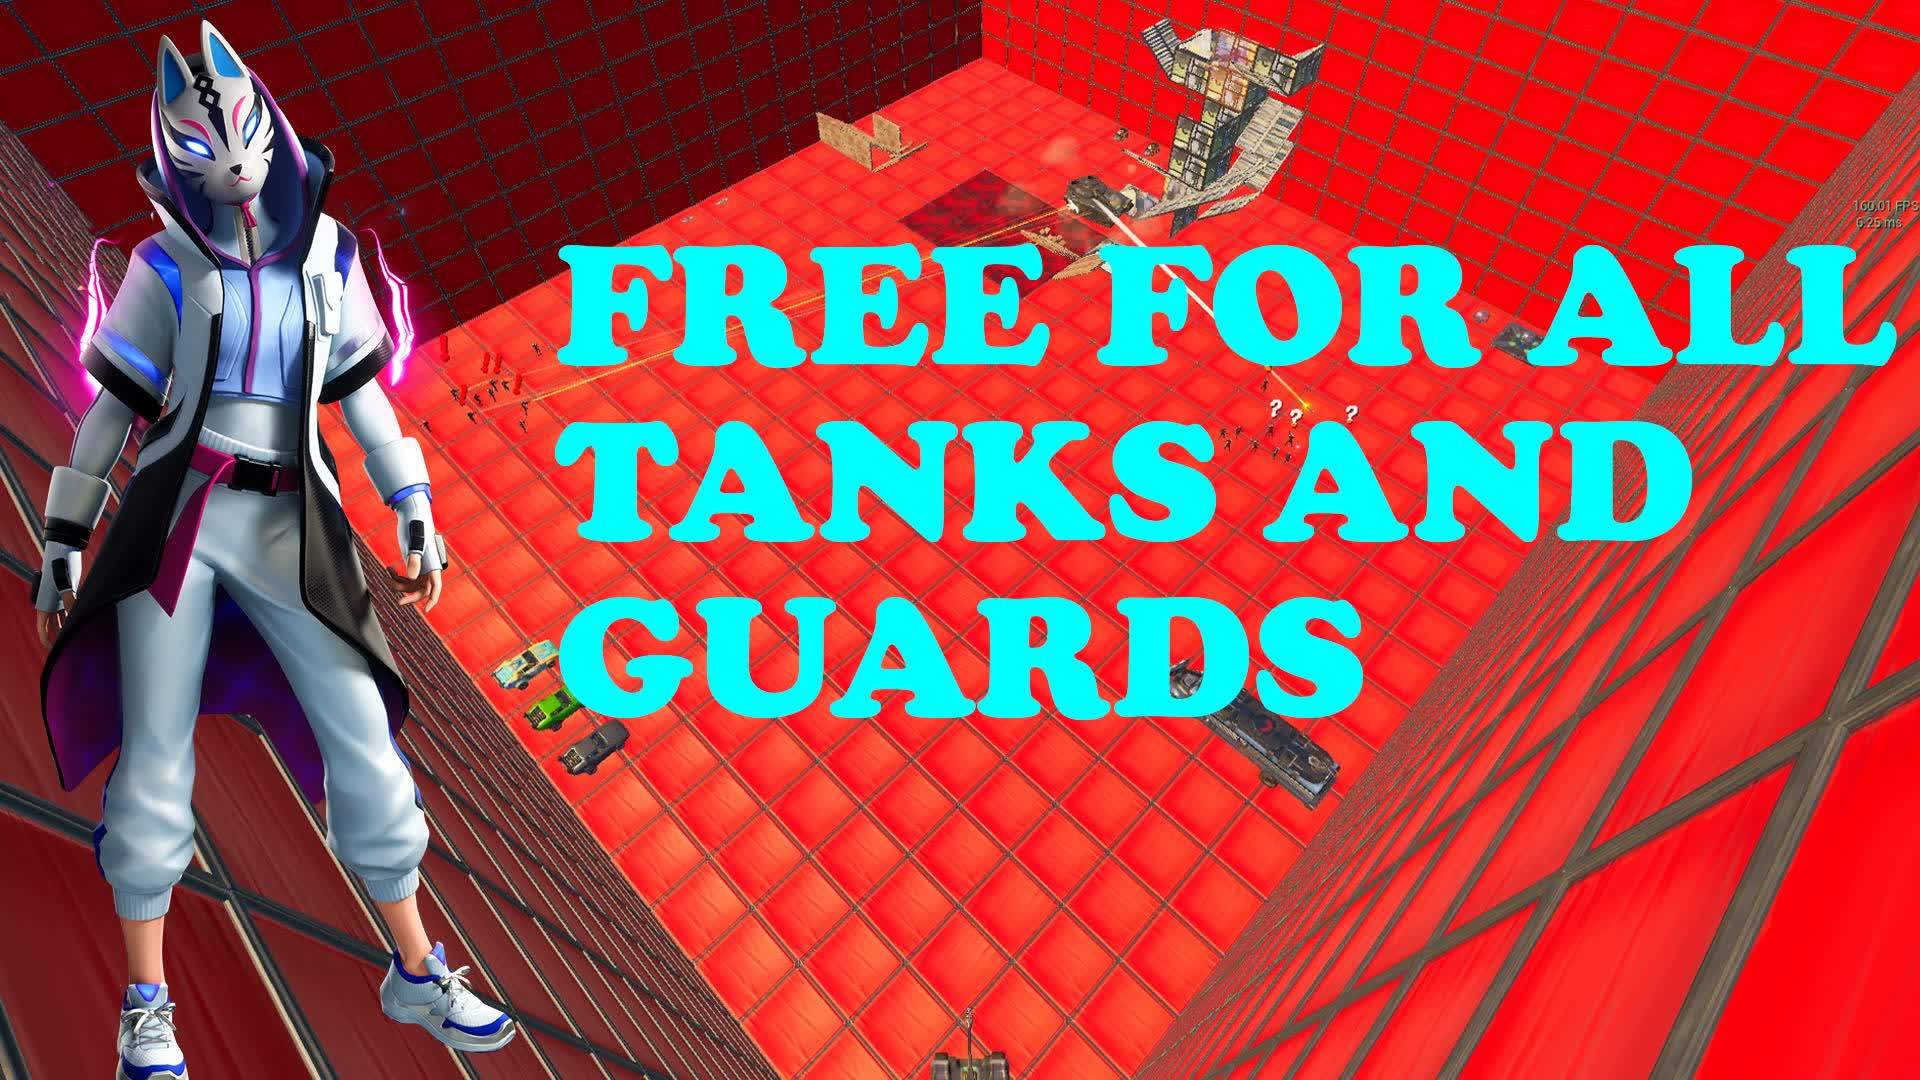 FREE FOR ALL-TANKS+ALL WEAPONS +ALL CARS